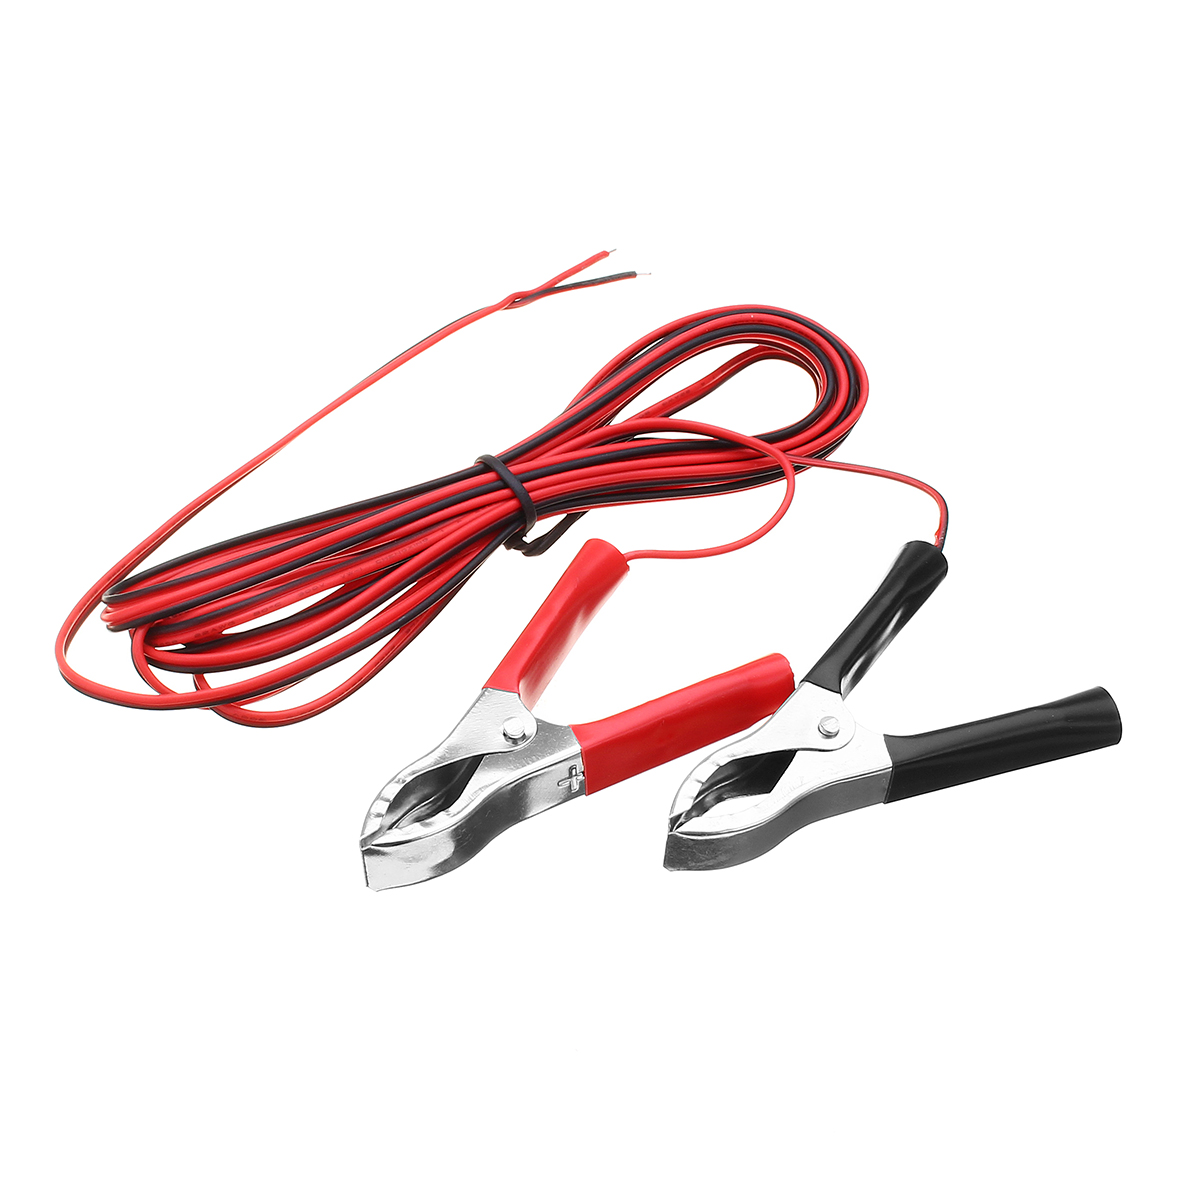 One Pair of 3m Length 3A Red+Black Color Alligator Clip Wiring for Solar Panel 24